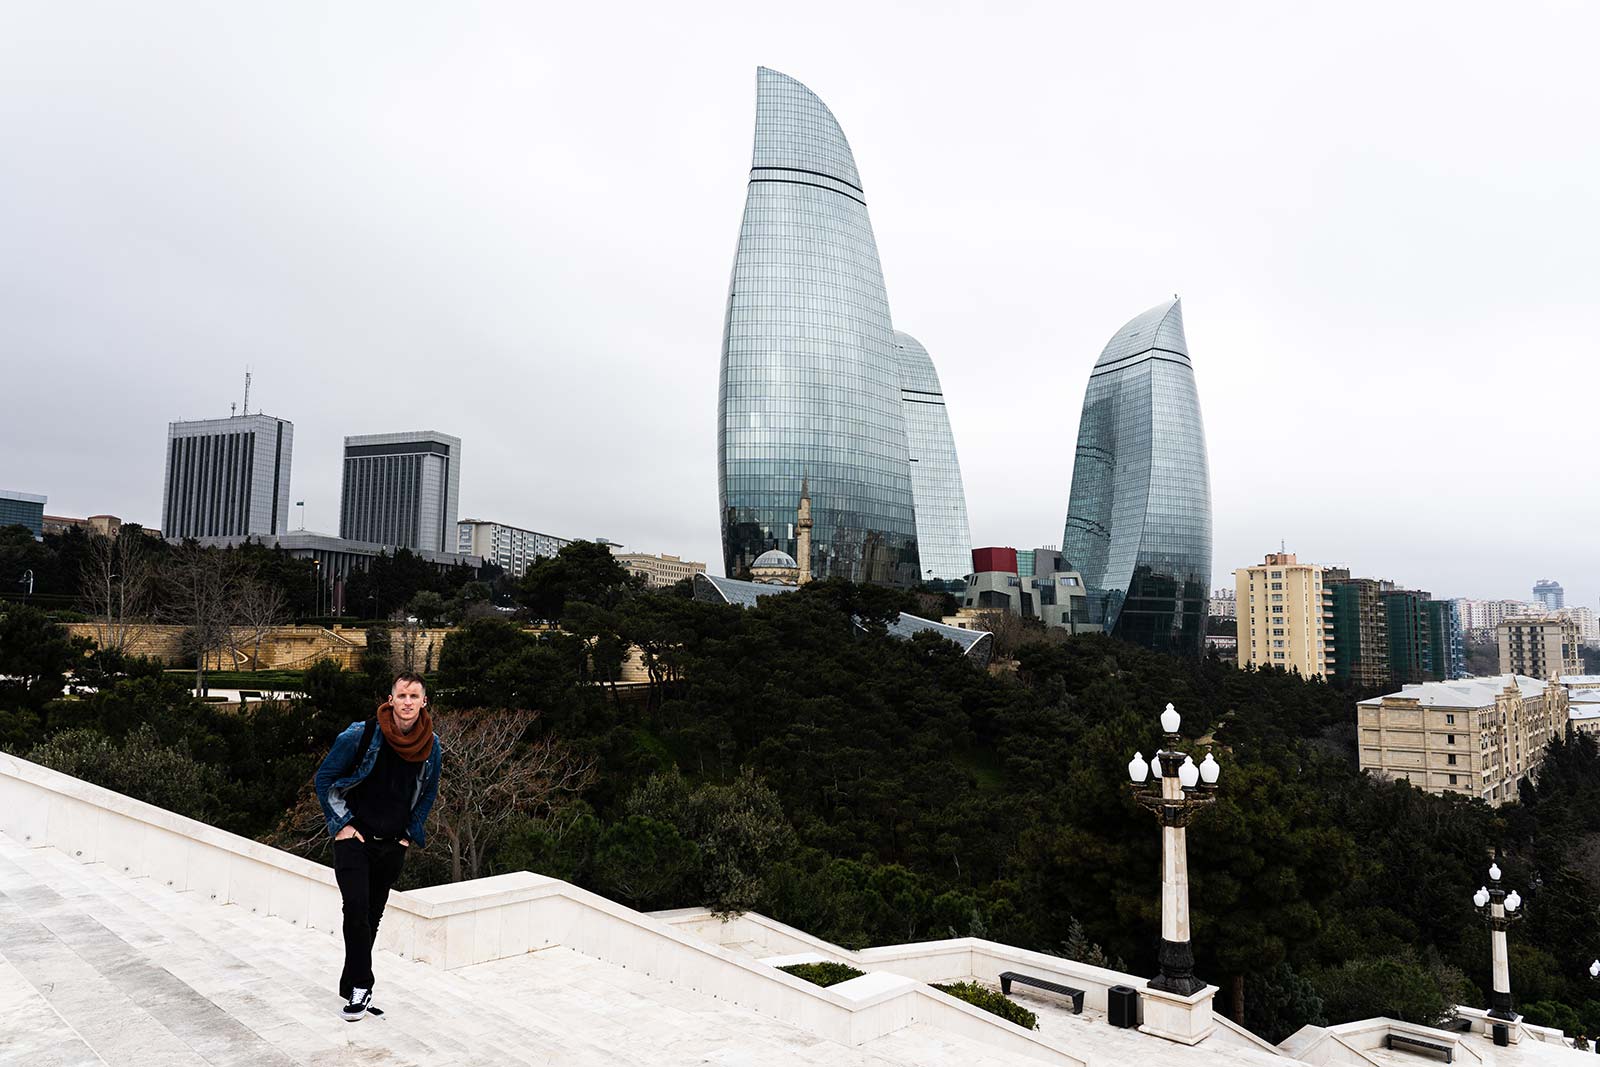 David Simpson and the Flame Towers in Baku, Azerbaijan. Confused taxis and pick ups